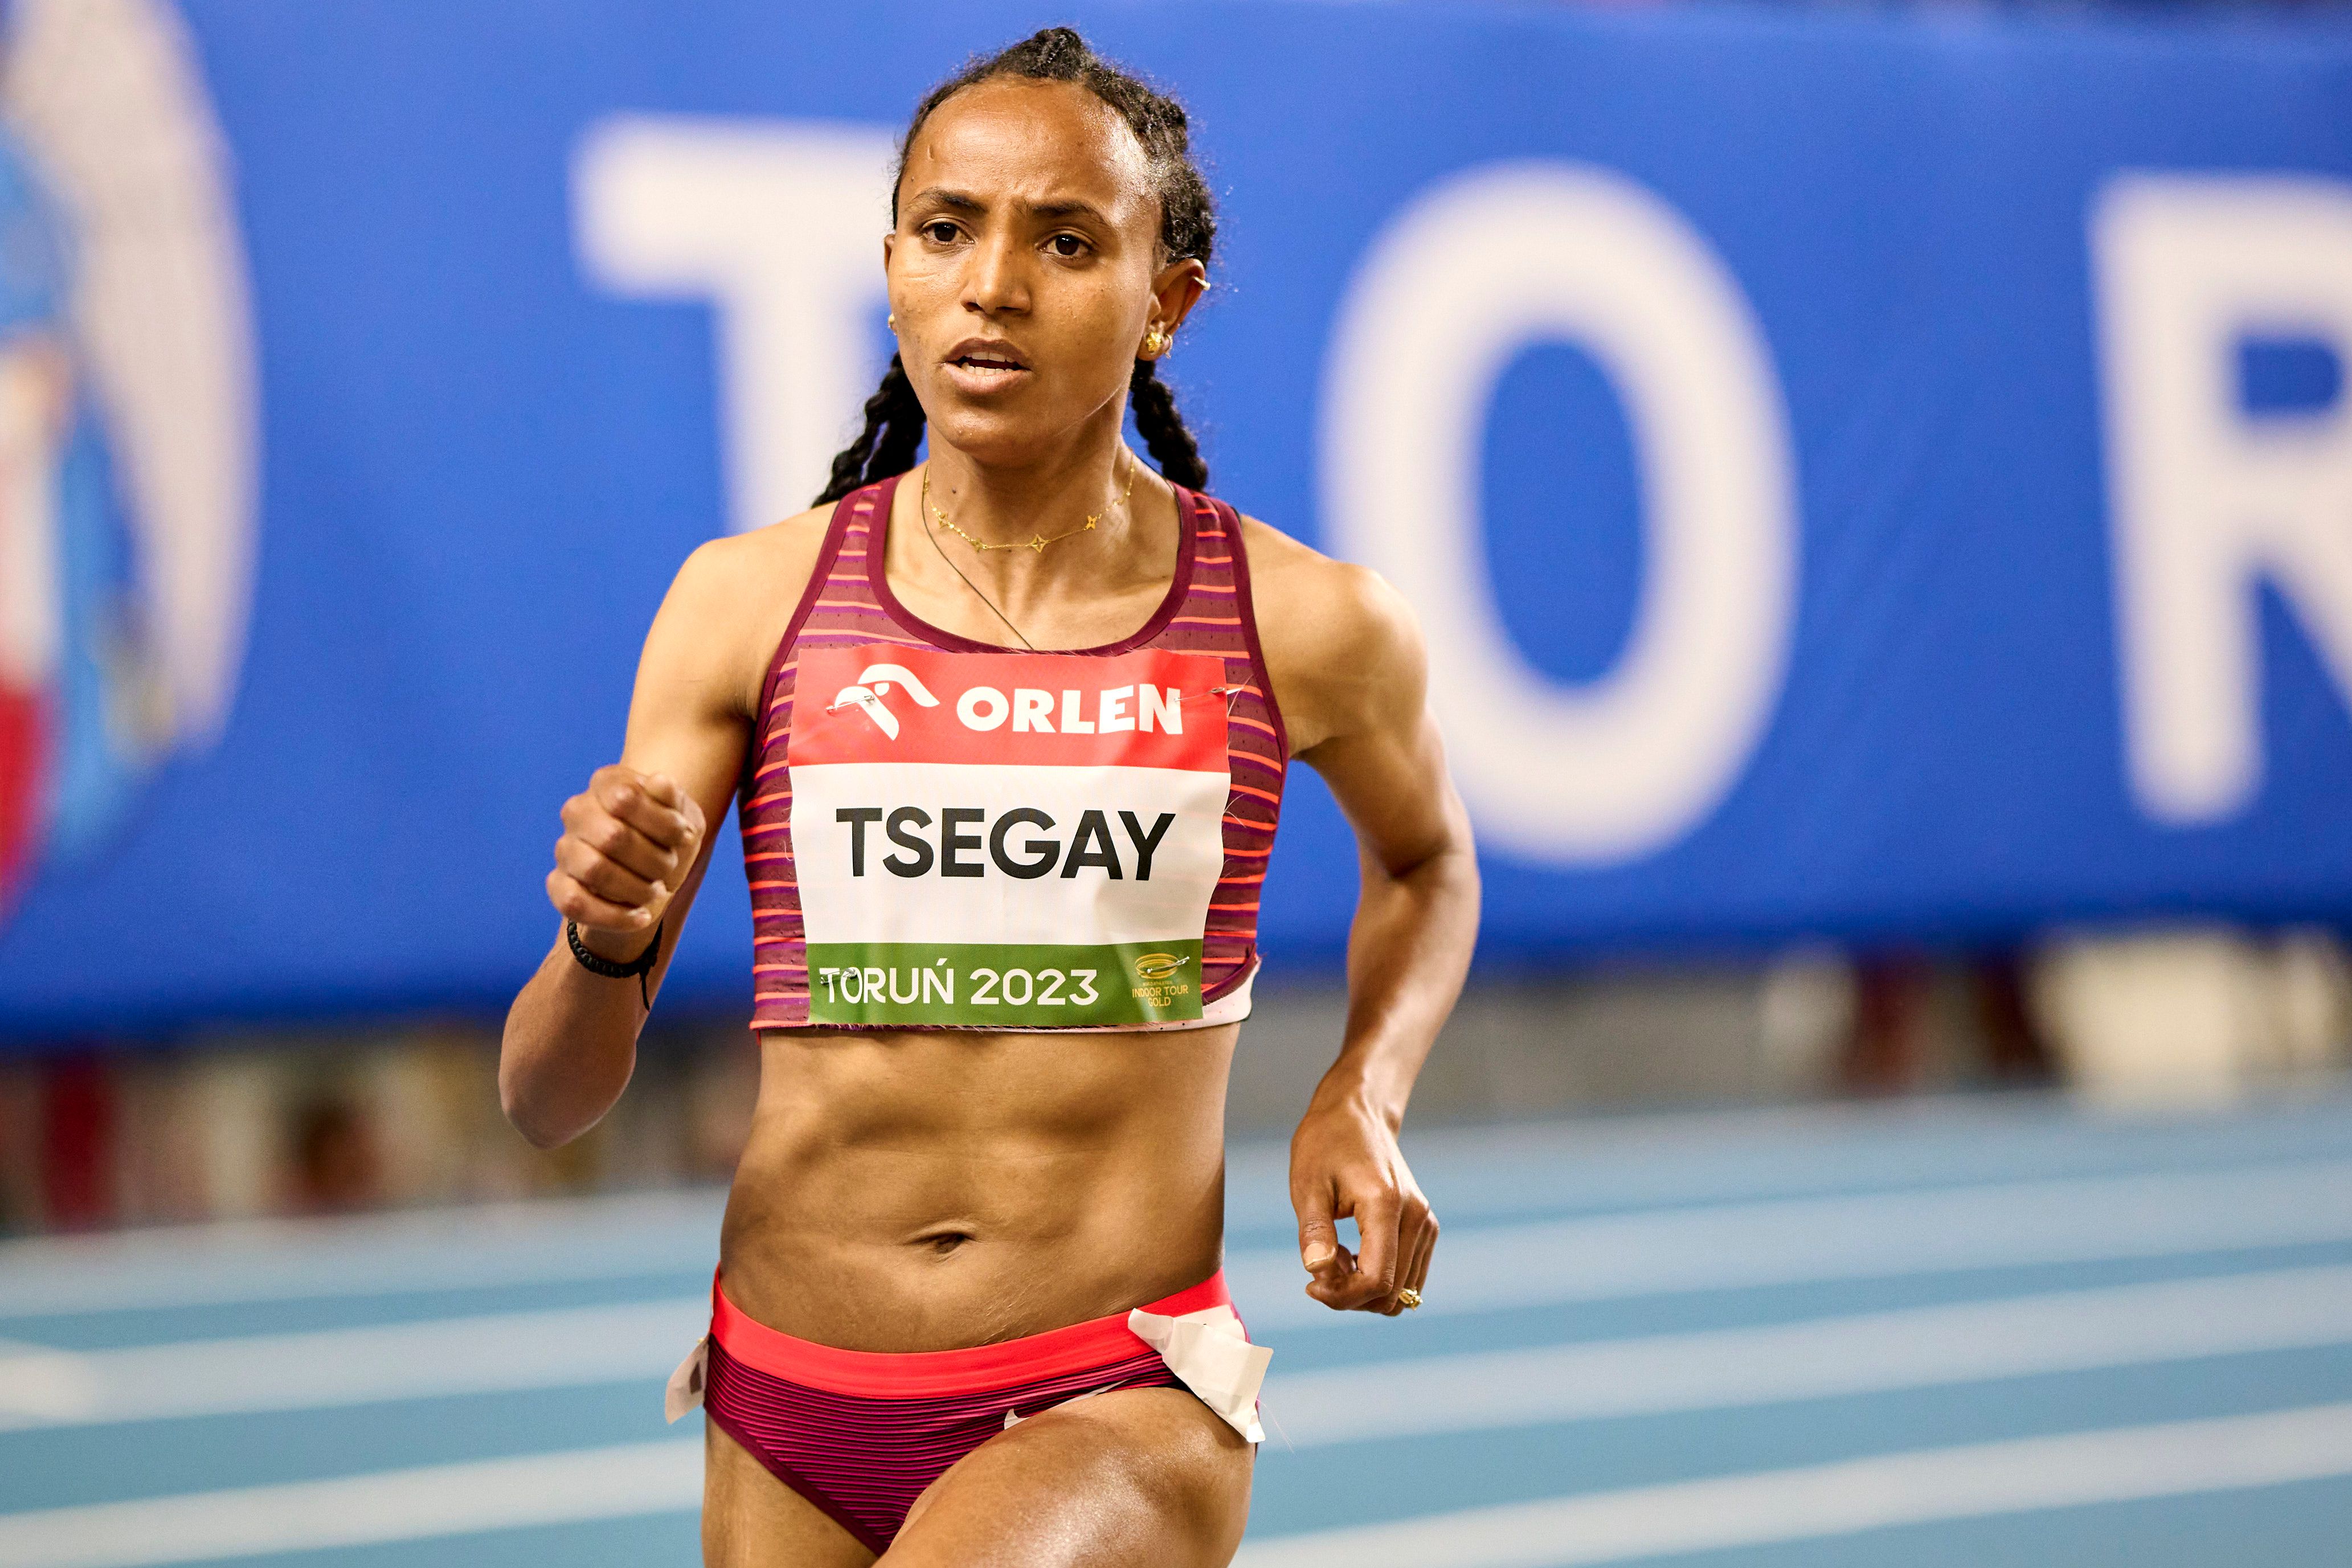 Gudaf Tsegay on her way to a 4:16.16 mile at the World Indoor Tour Gold meeting in Torun